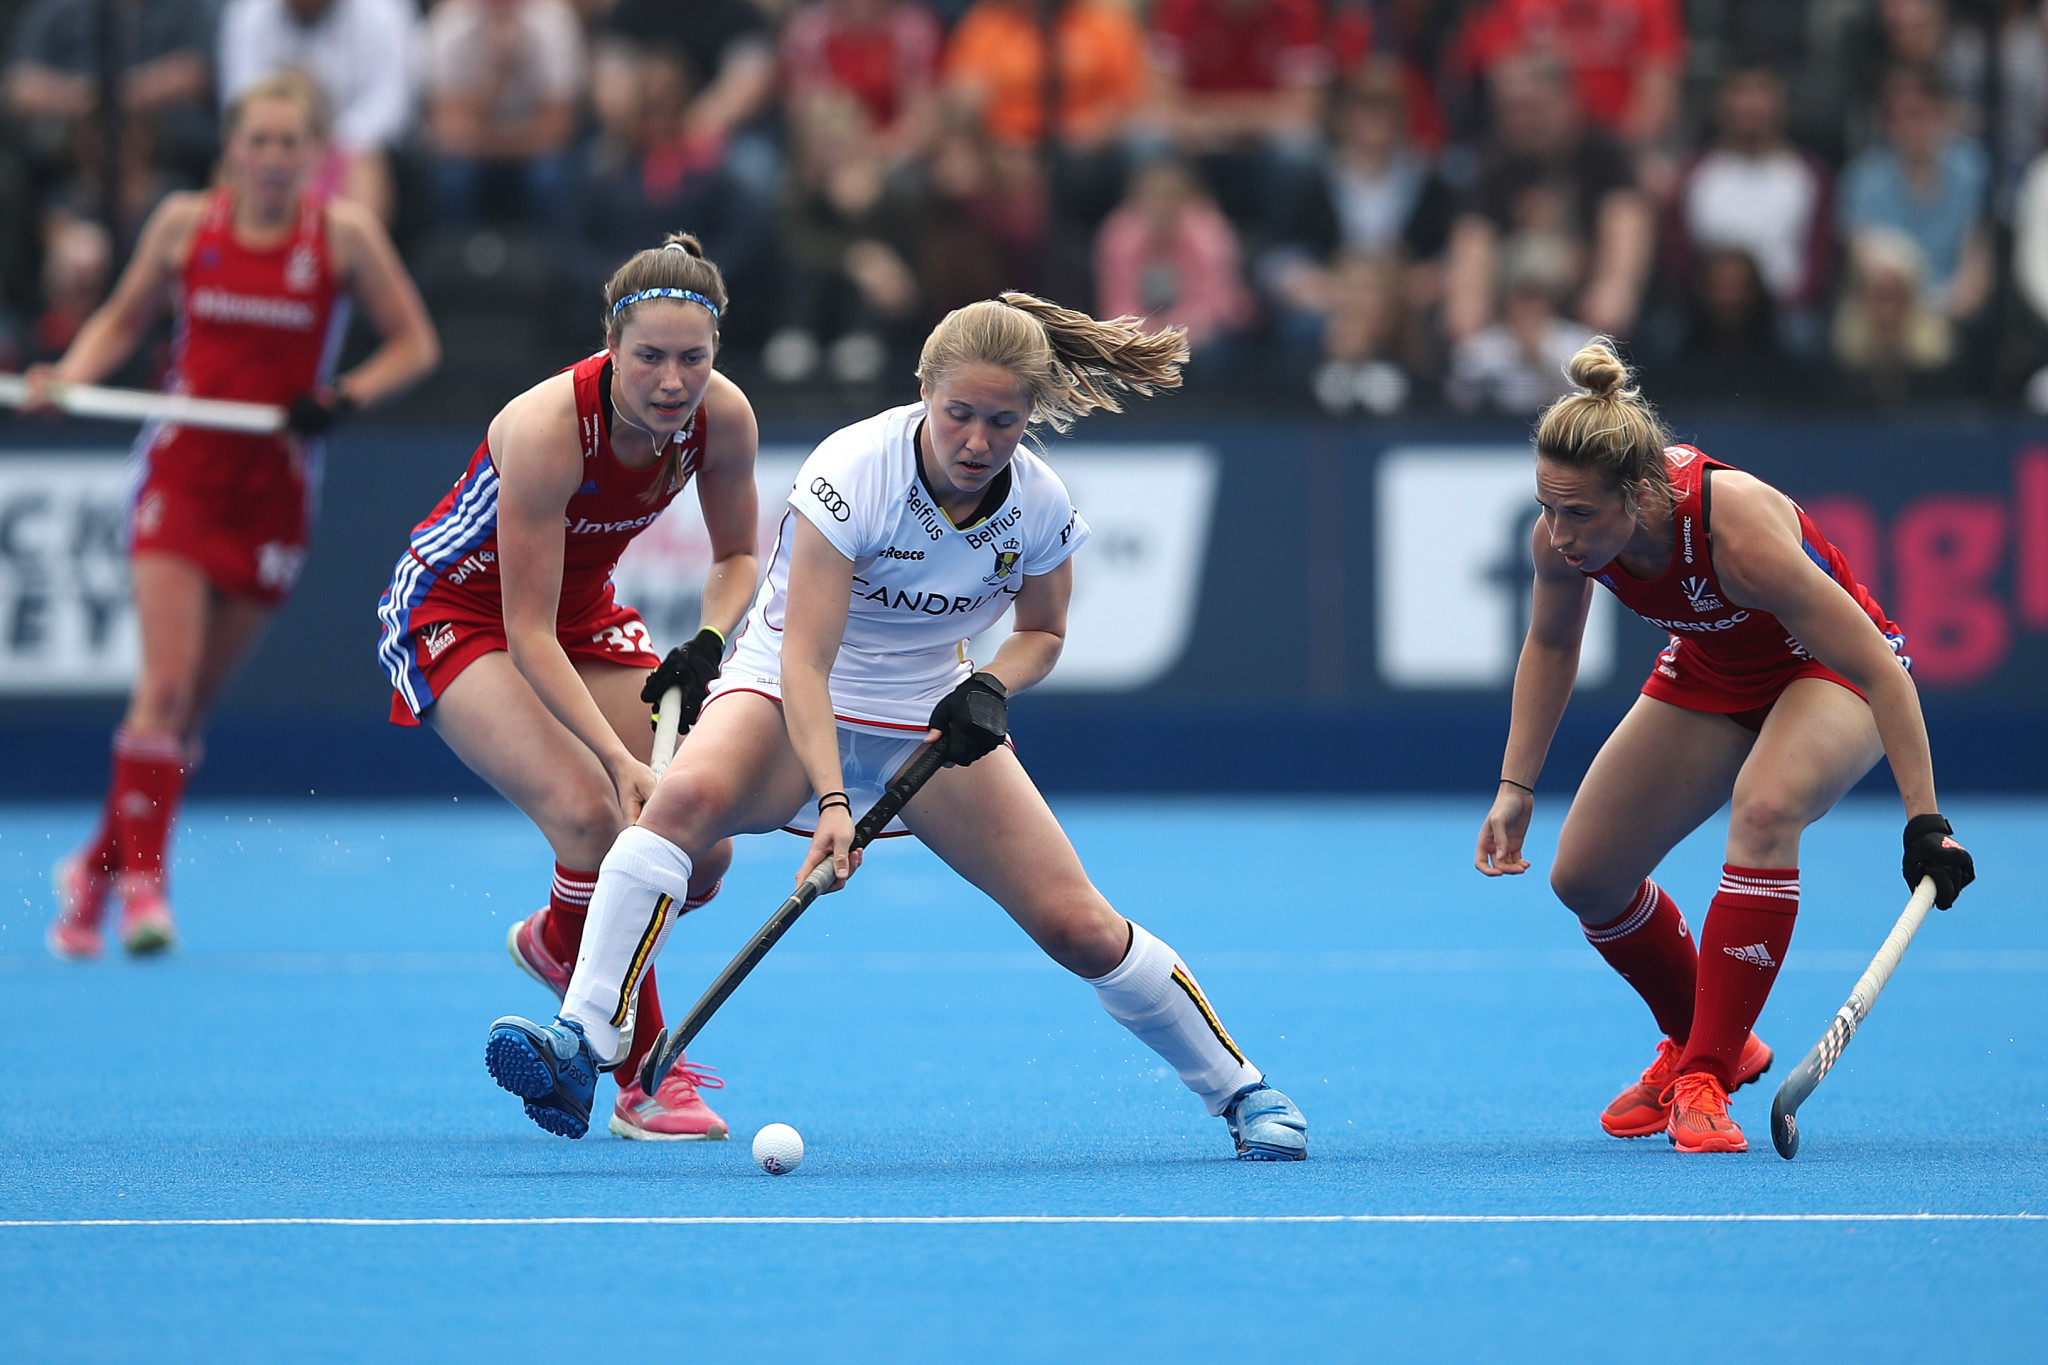 Belgium and Britain share victories in FIH Hockey Pro League